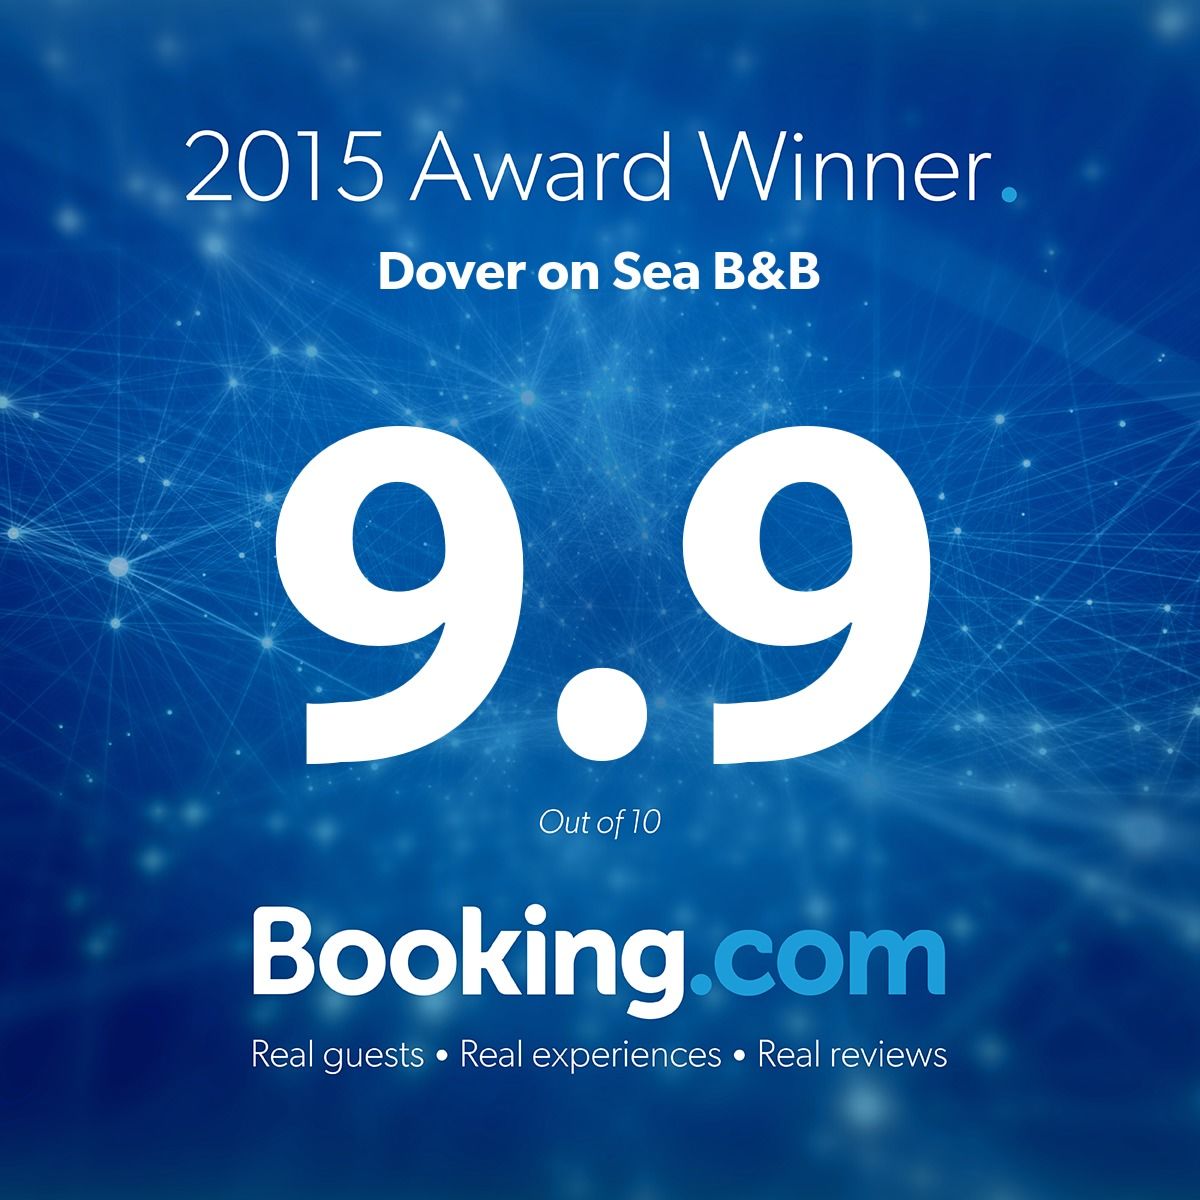 9.9 Rating on Booking.com